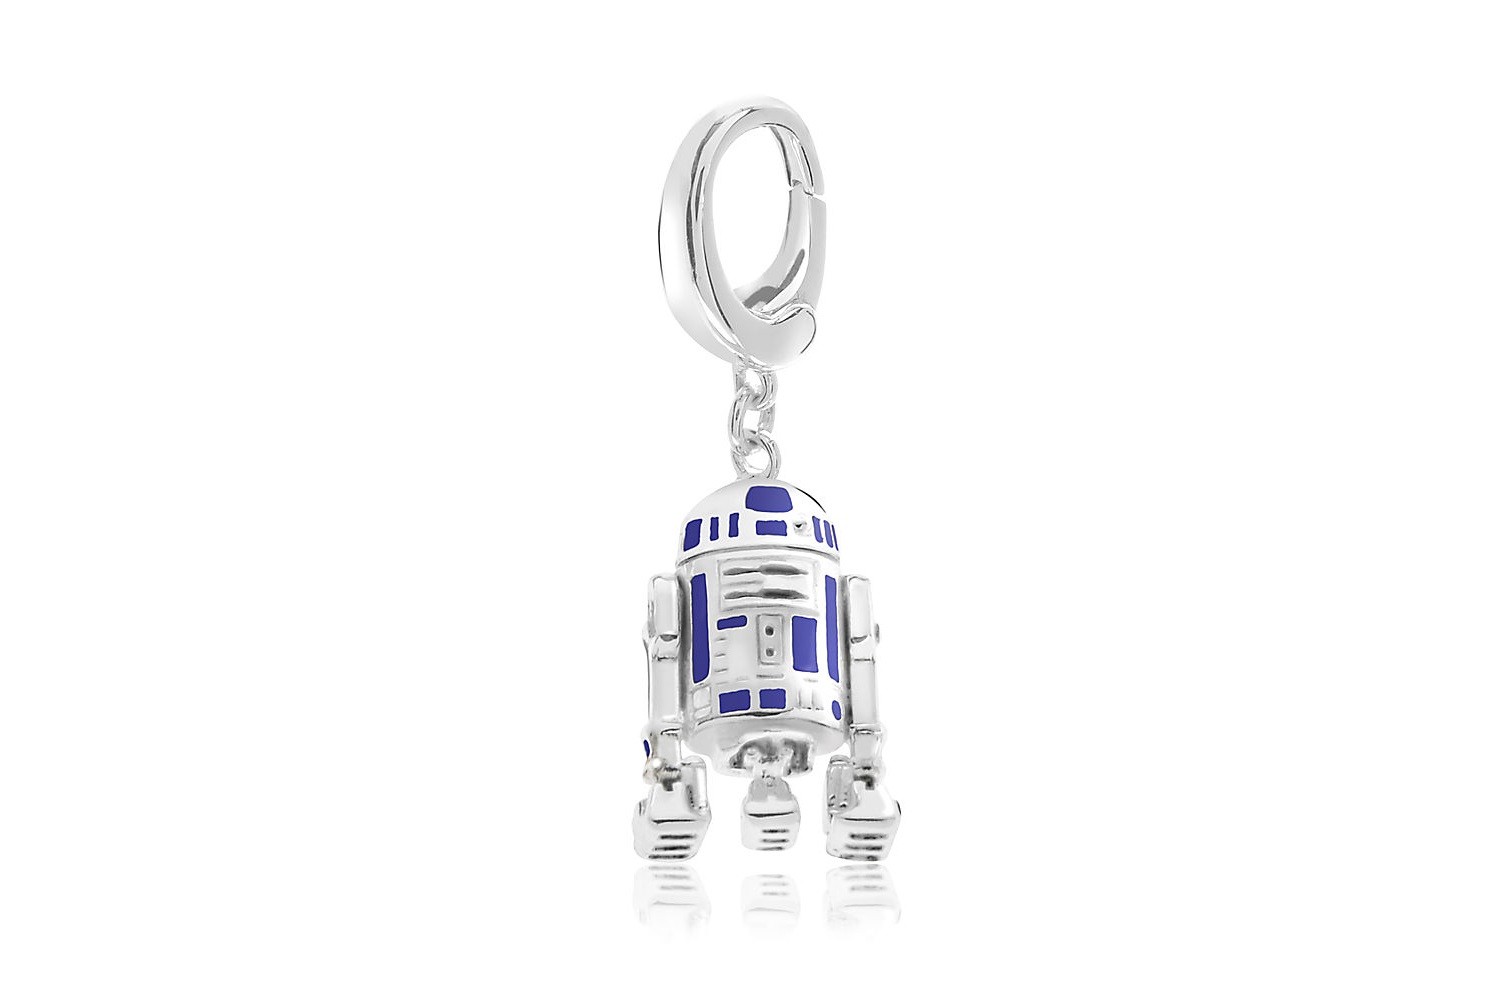 New Silver R2-D2 charm at Disney Store